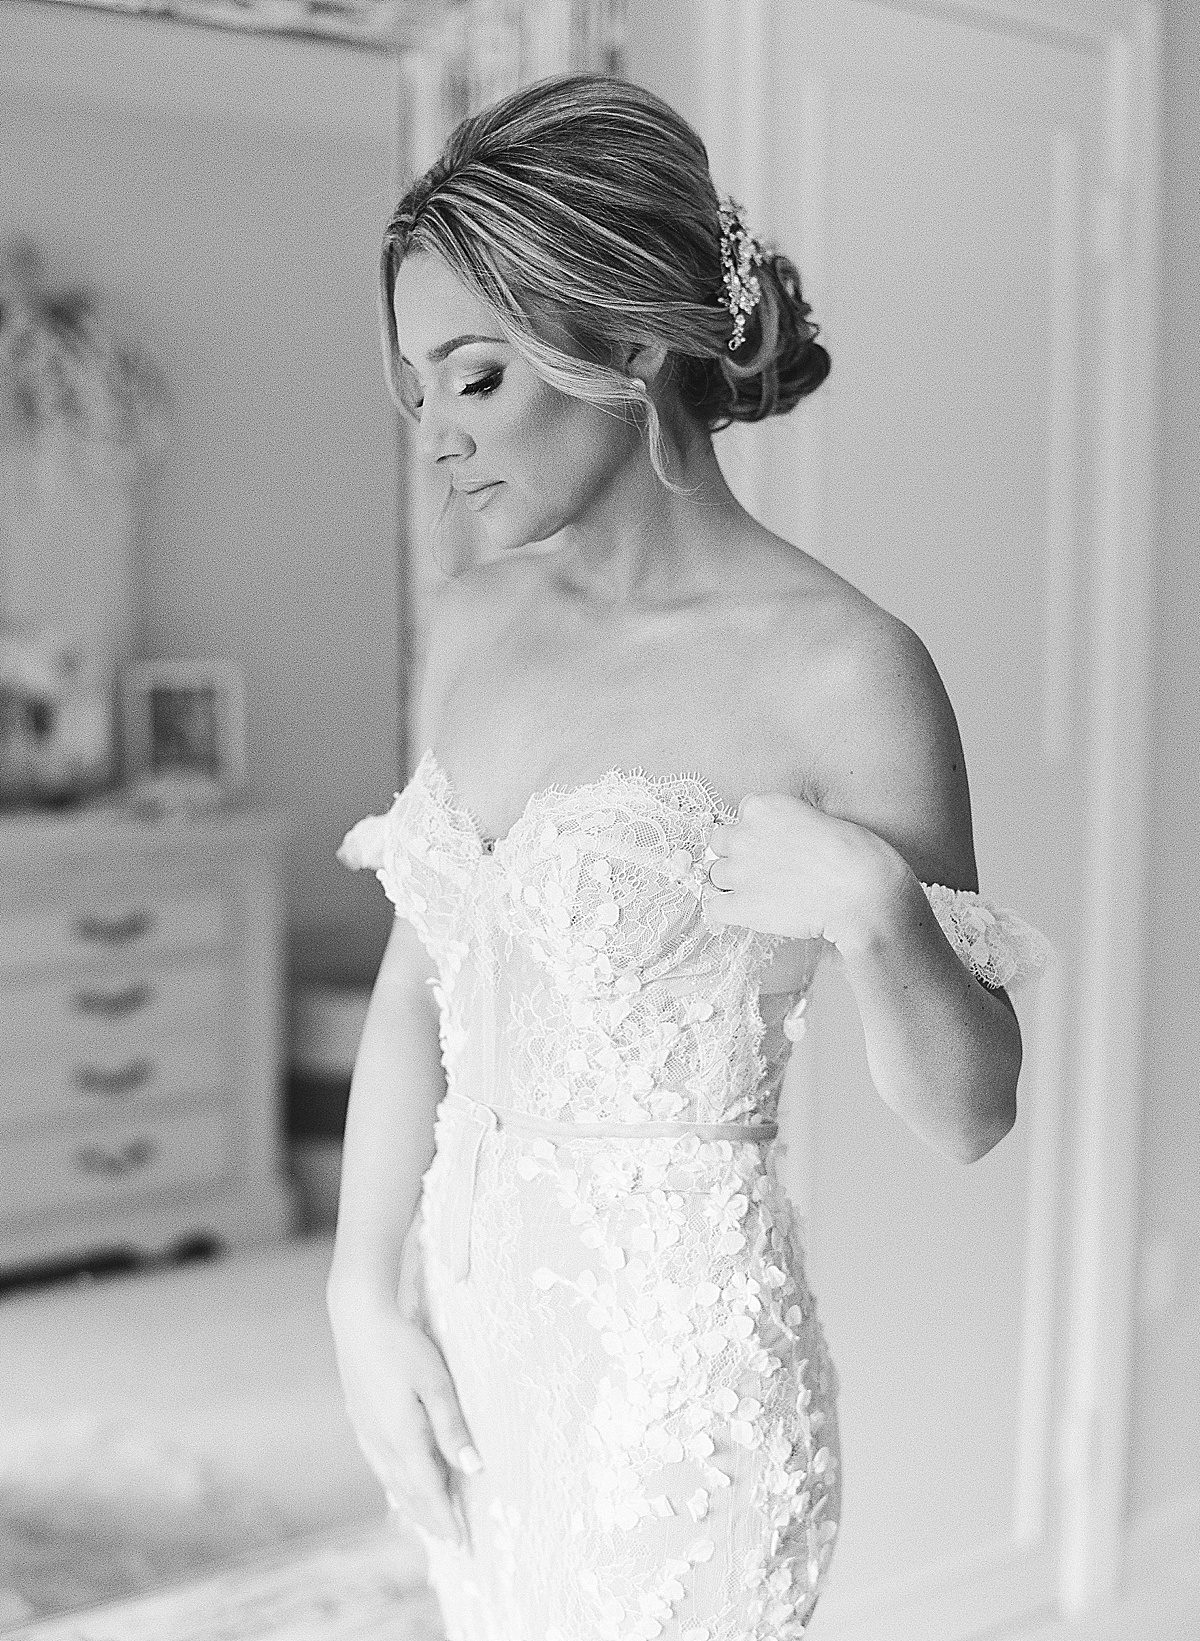 Black and White of Bride Getting Dressed Photo